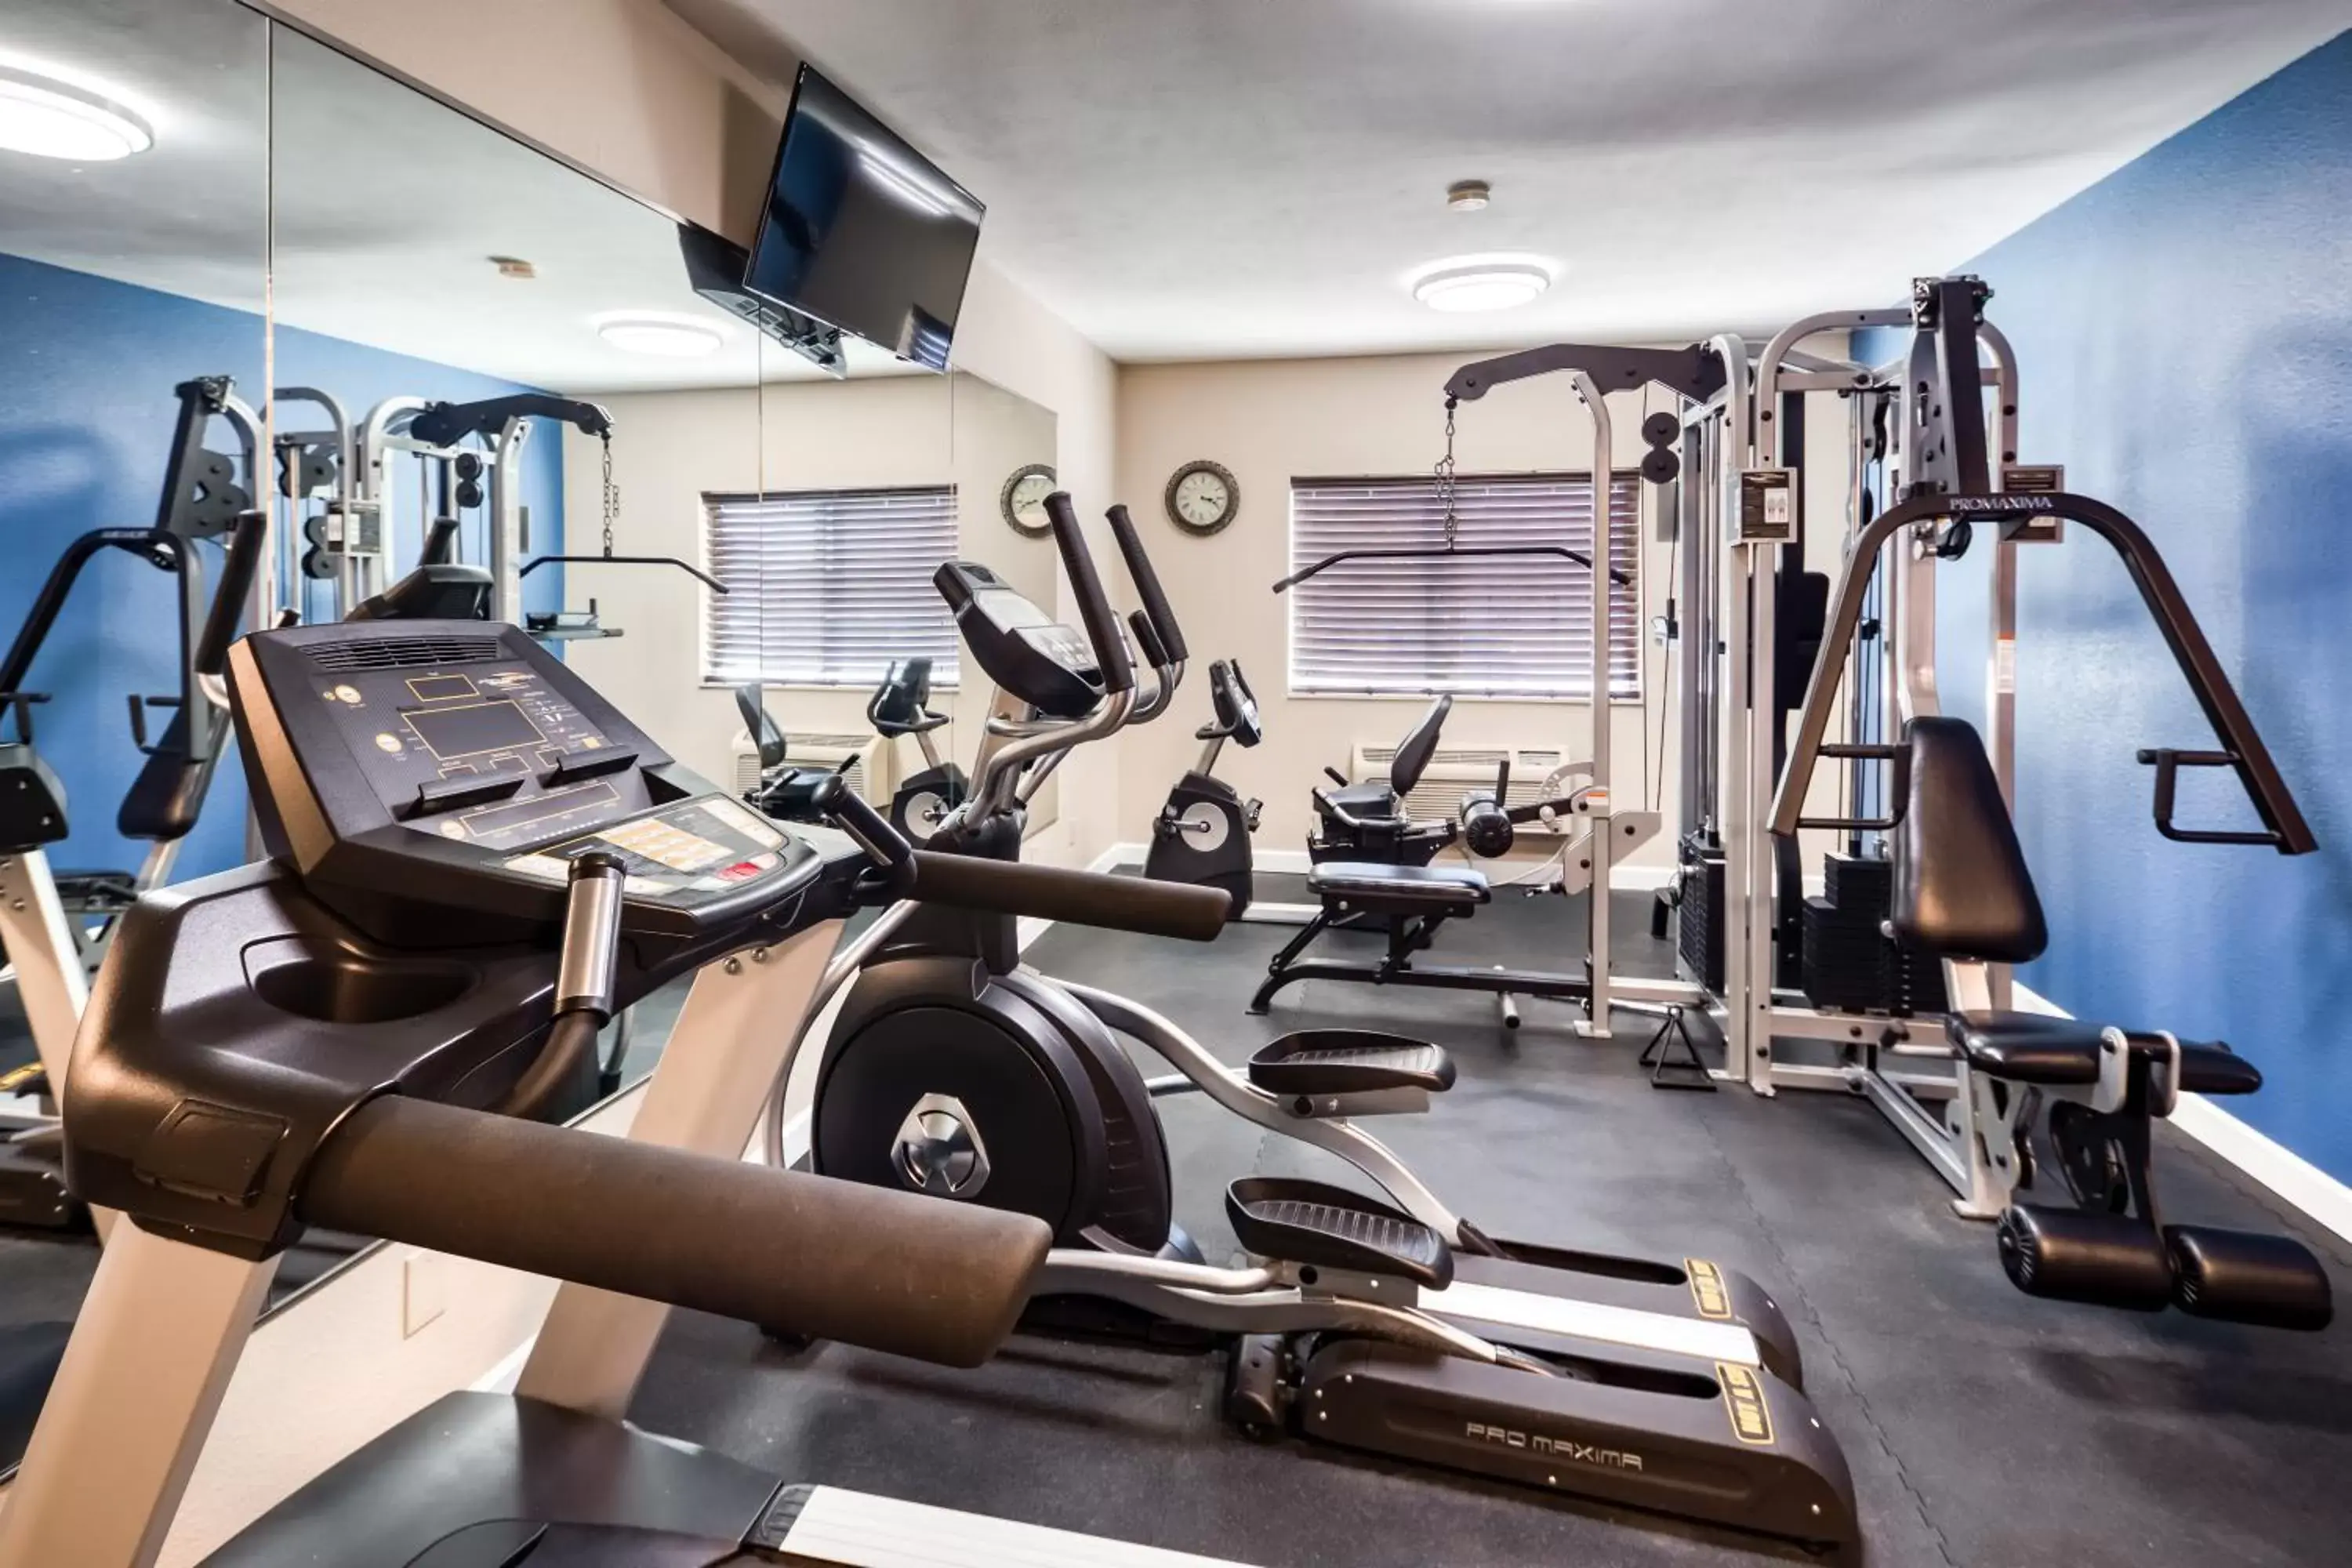 Fitness centre/facilities, Fitness Center/Facilities in Quality Inn & Suites Springfield Southwest near I-72